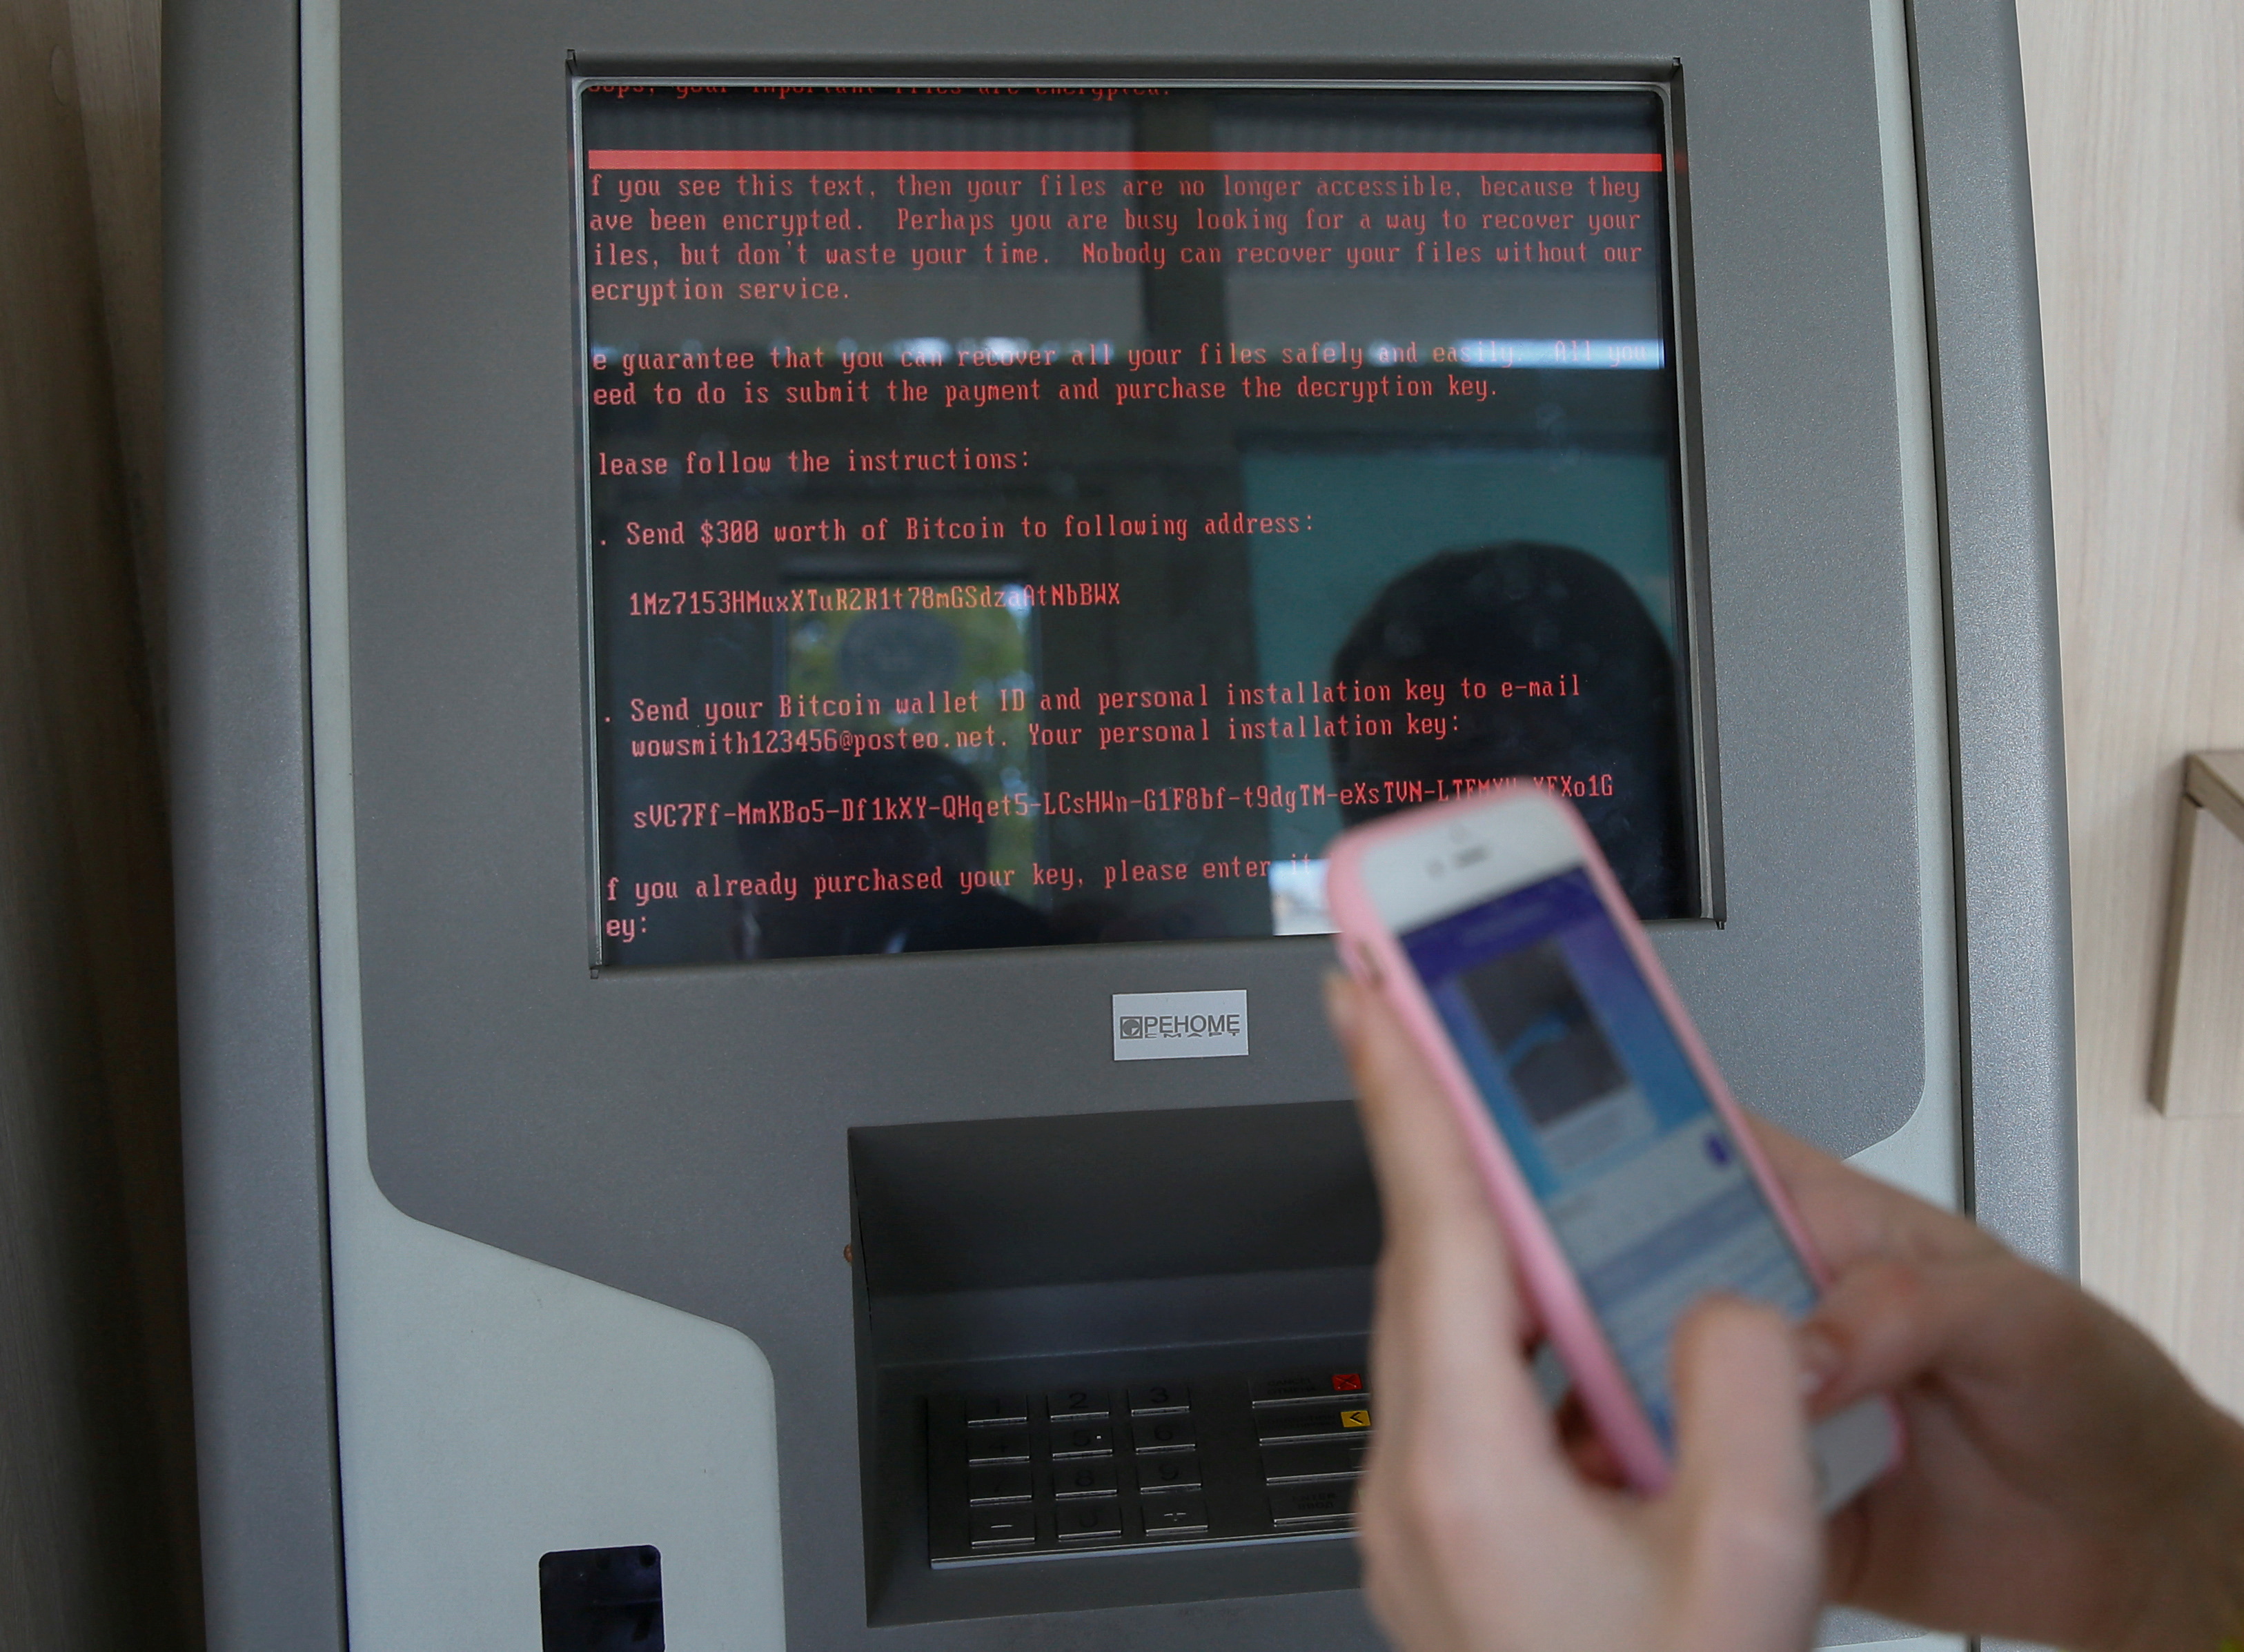 A message demanding money is seen on a monitor of a payment terminal at a branch of Ukraine's state-owned bank Oschadbank after Ukrainian institutions were hit by a wave of cyber attacks earlier in the day, in Kiev